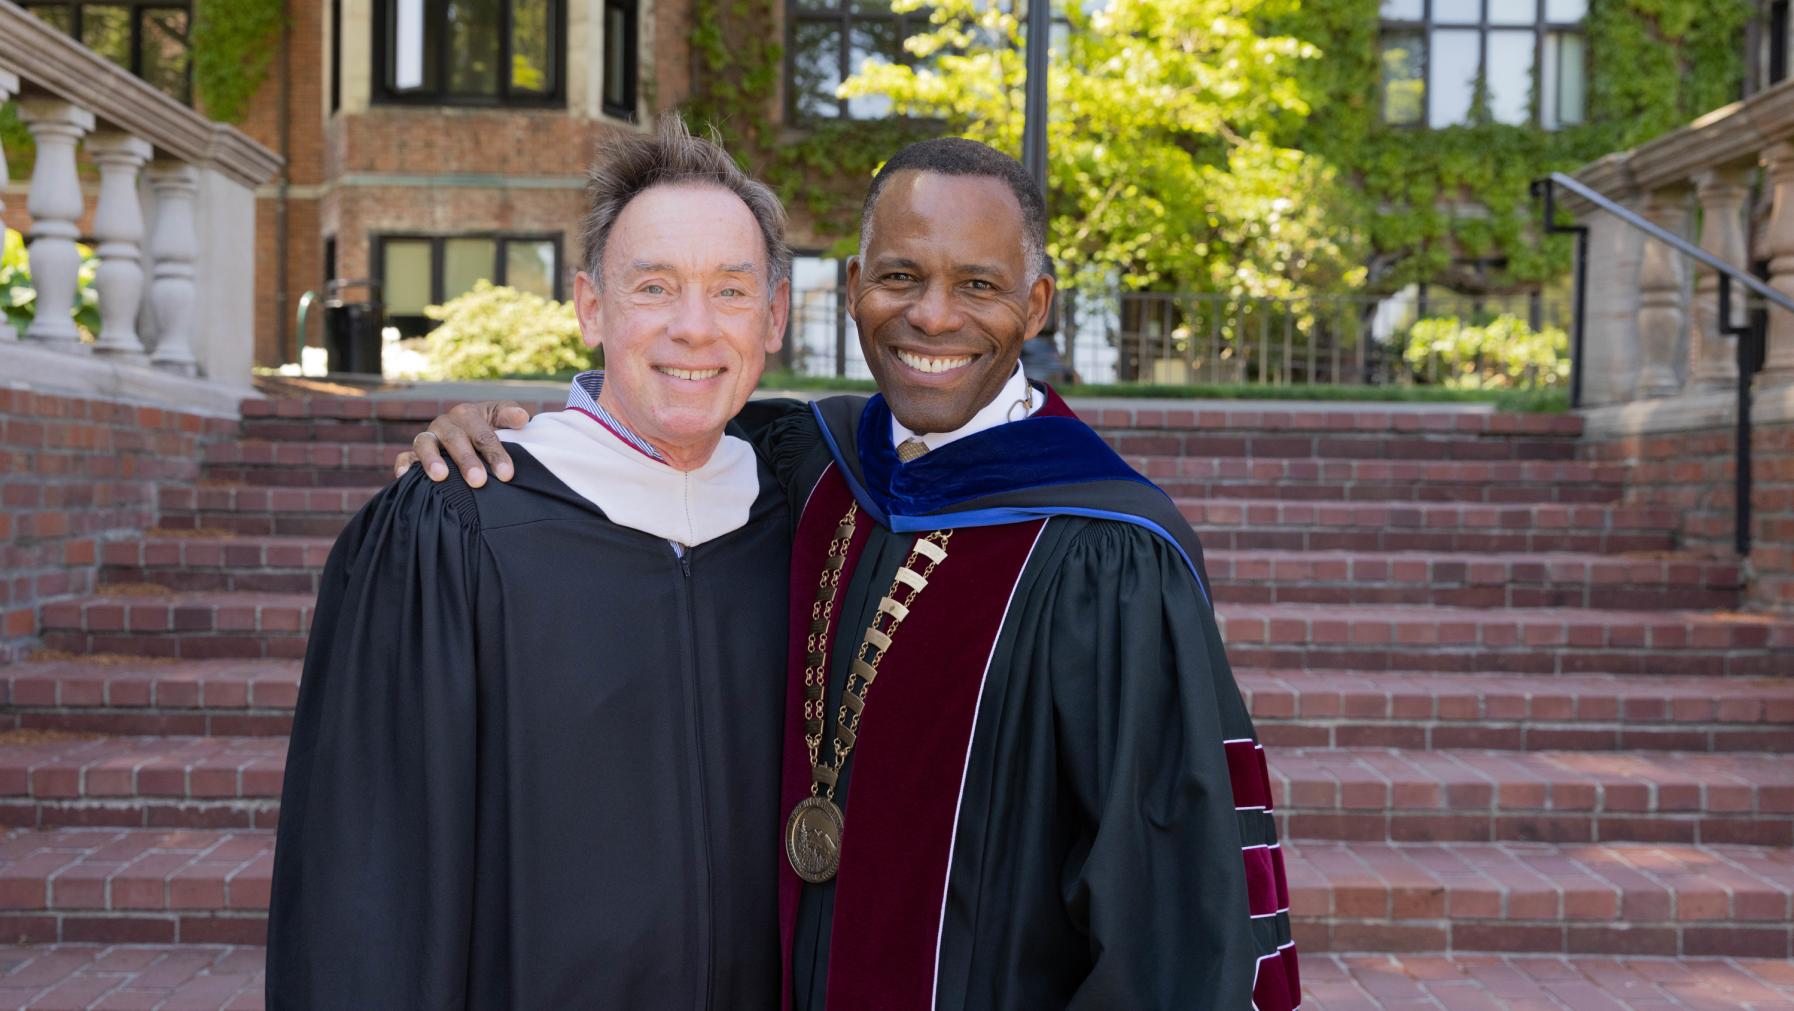 President Crawford and Chair of the Board of Trustees Robert Pohlad P'07 prepare for Commencement.